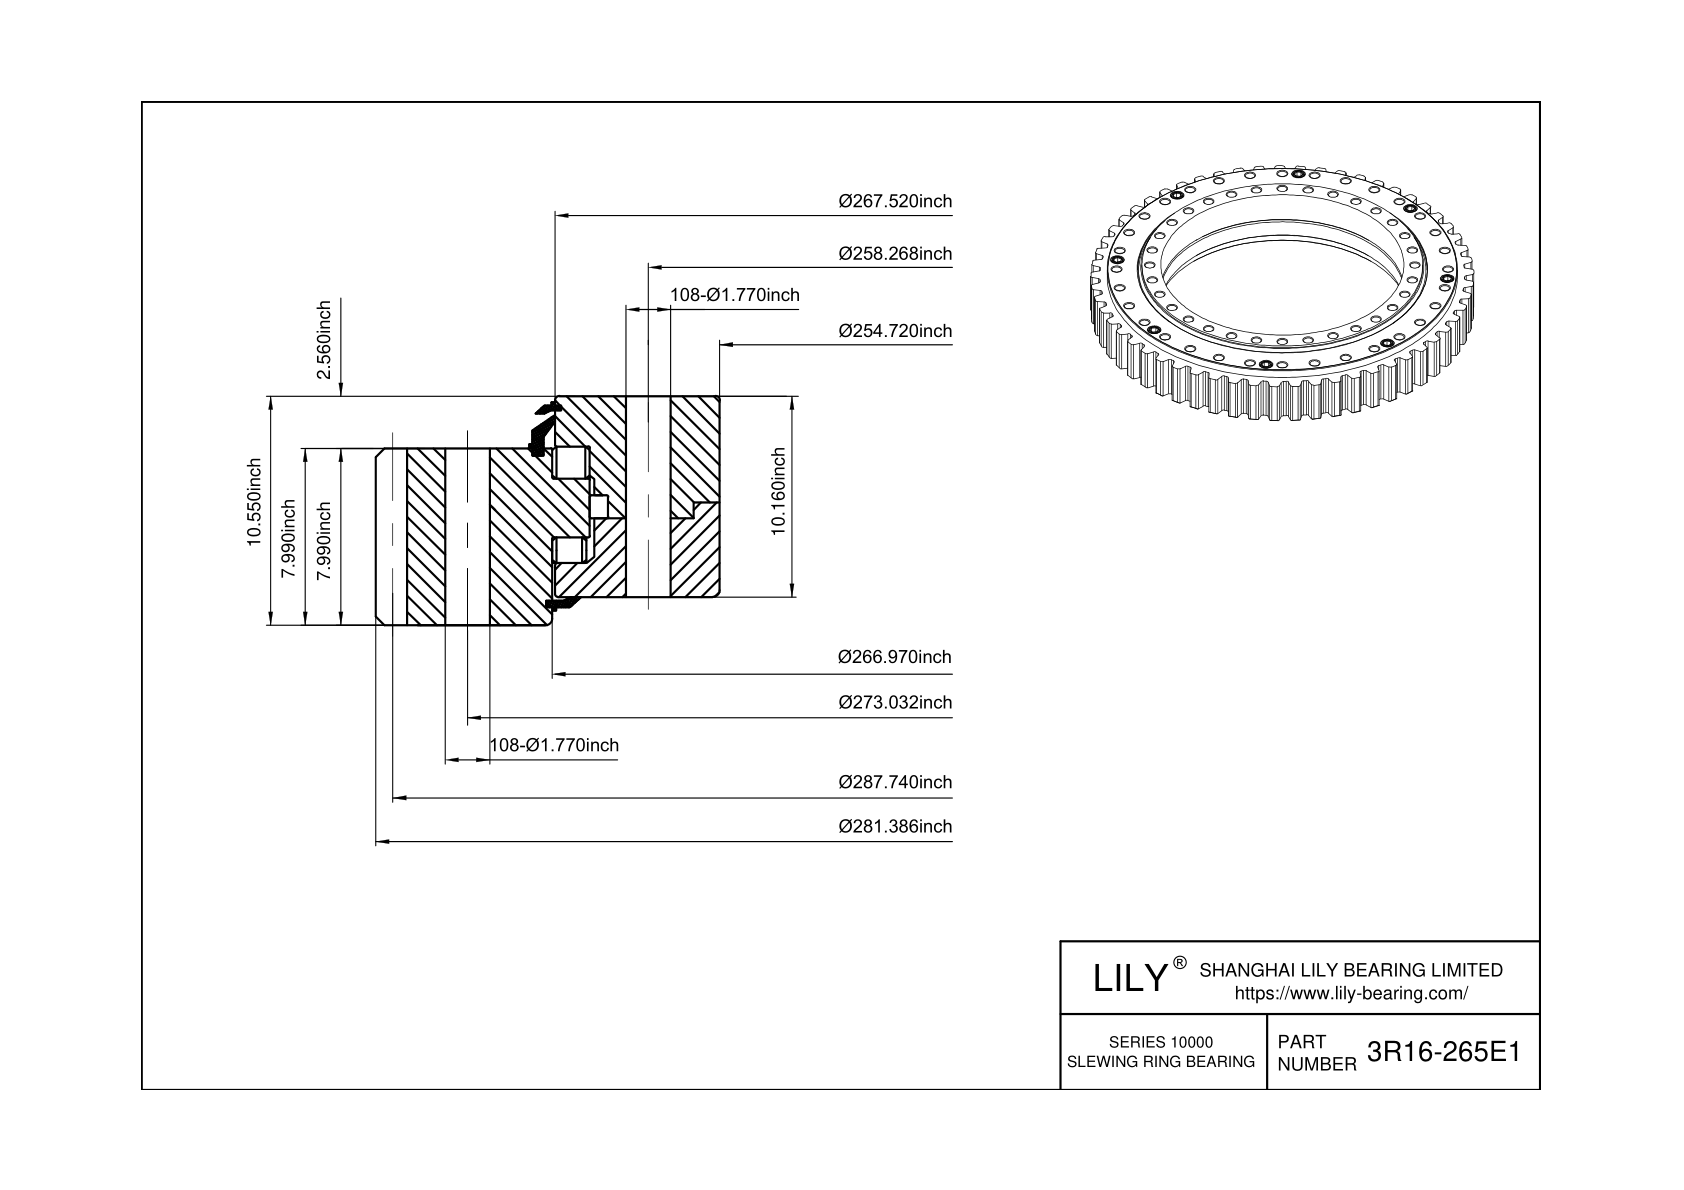 3R16-265E1 Three-Row Cross Roller Slewing Ring Bearing cad drawing